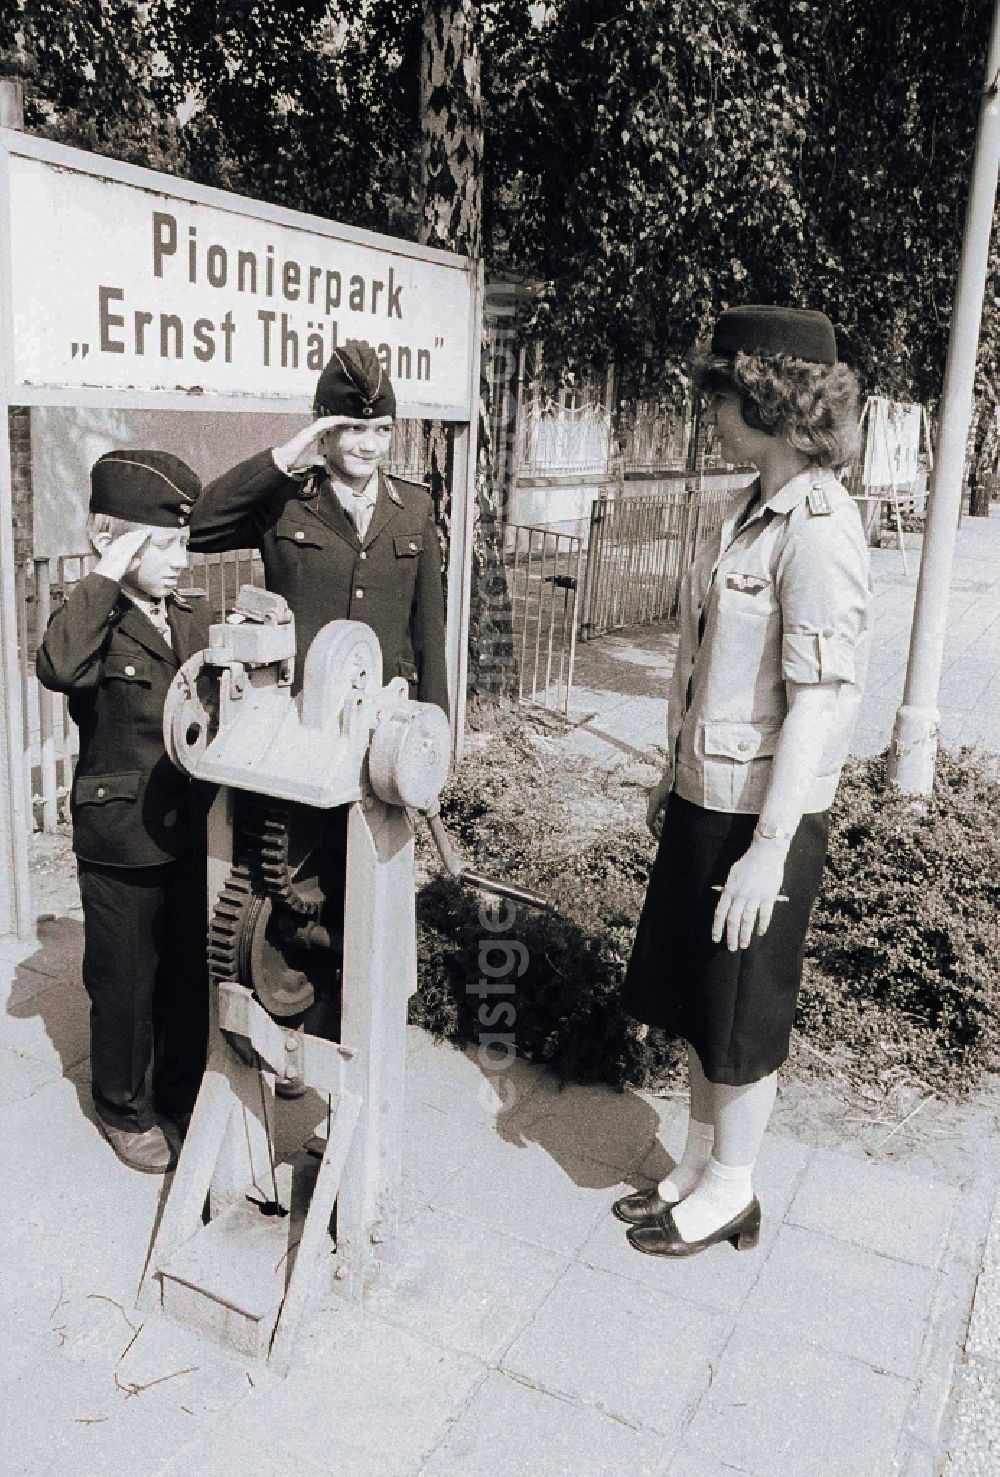 Berlin: Children and youngsters in uniforms with the pioneer's railway in the pioneer's park / park road in the leisure centre and recreation centre (FEZ) in the Wuhlheide in Berlin, the former capital of the GDR, German democratic republic